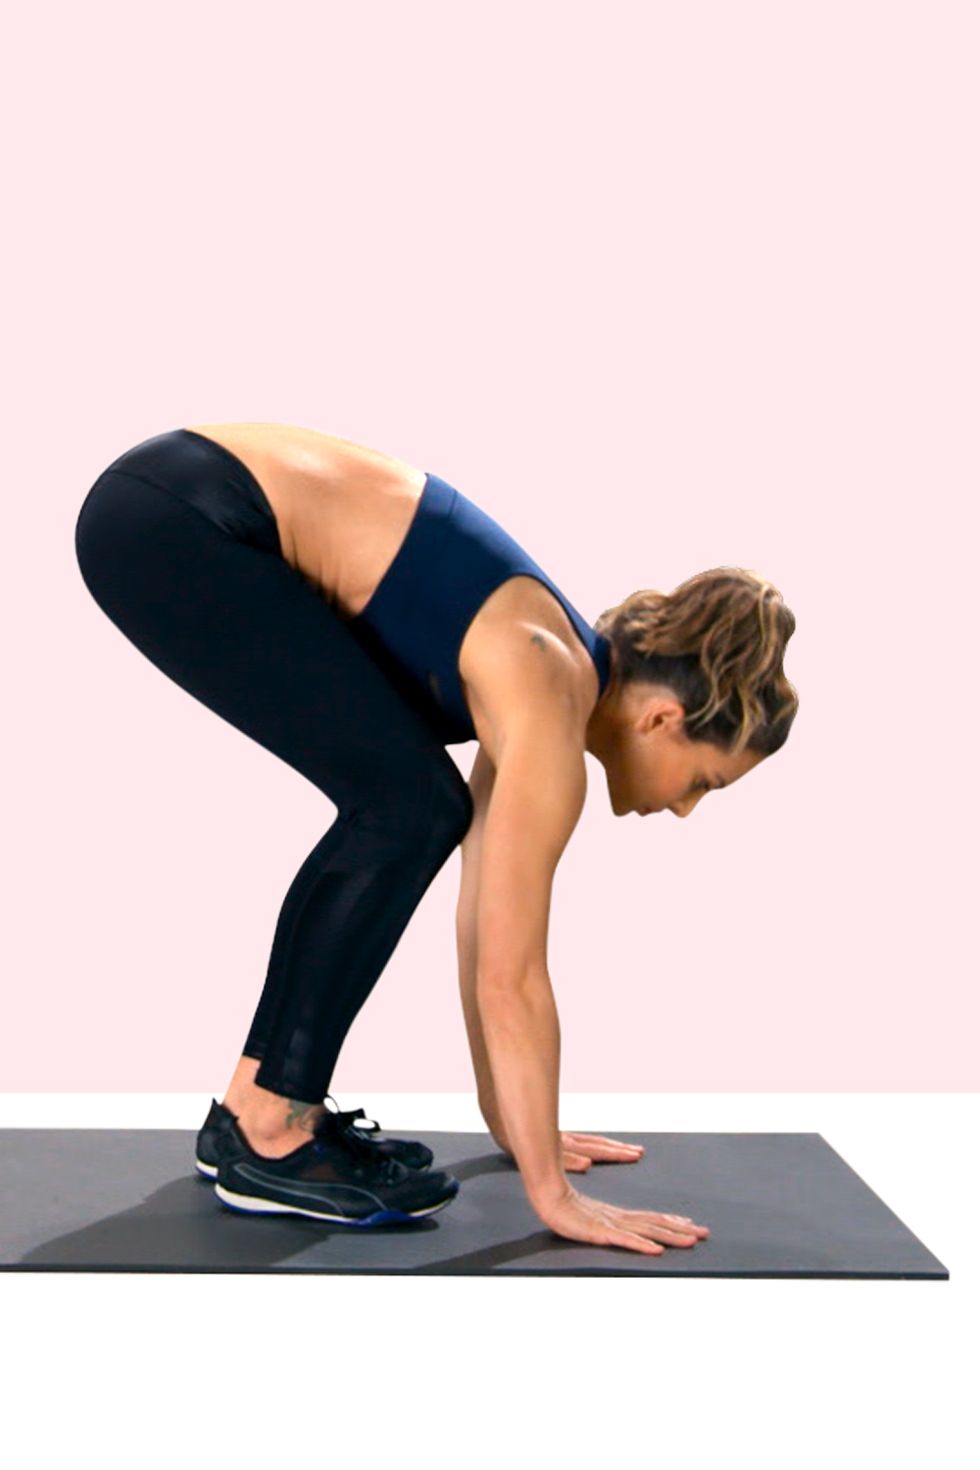 This Jillian Michaels Workout Will Tone You Up